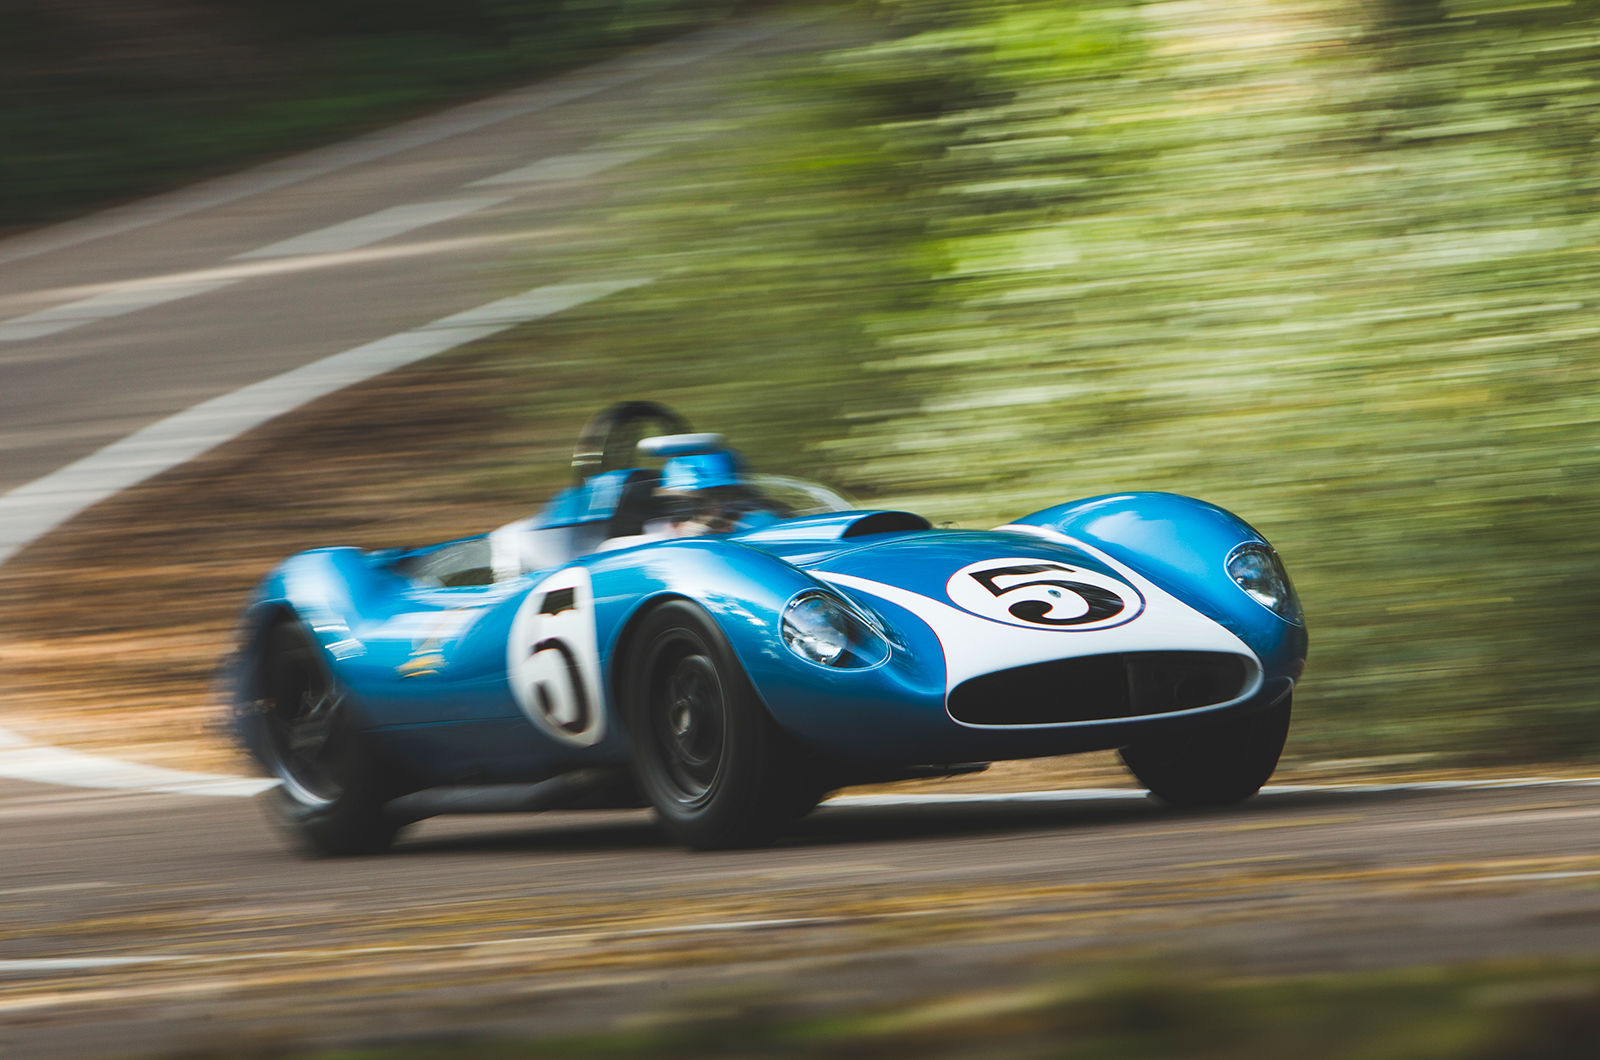 Classic & Sports Car – The all American hero: driving Lance Reventlow’s Scarab sports-racer 